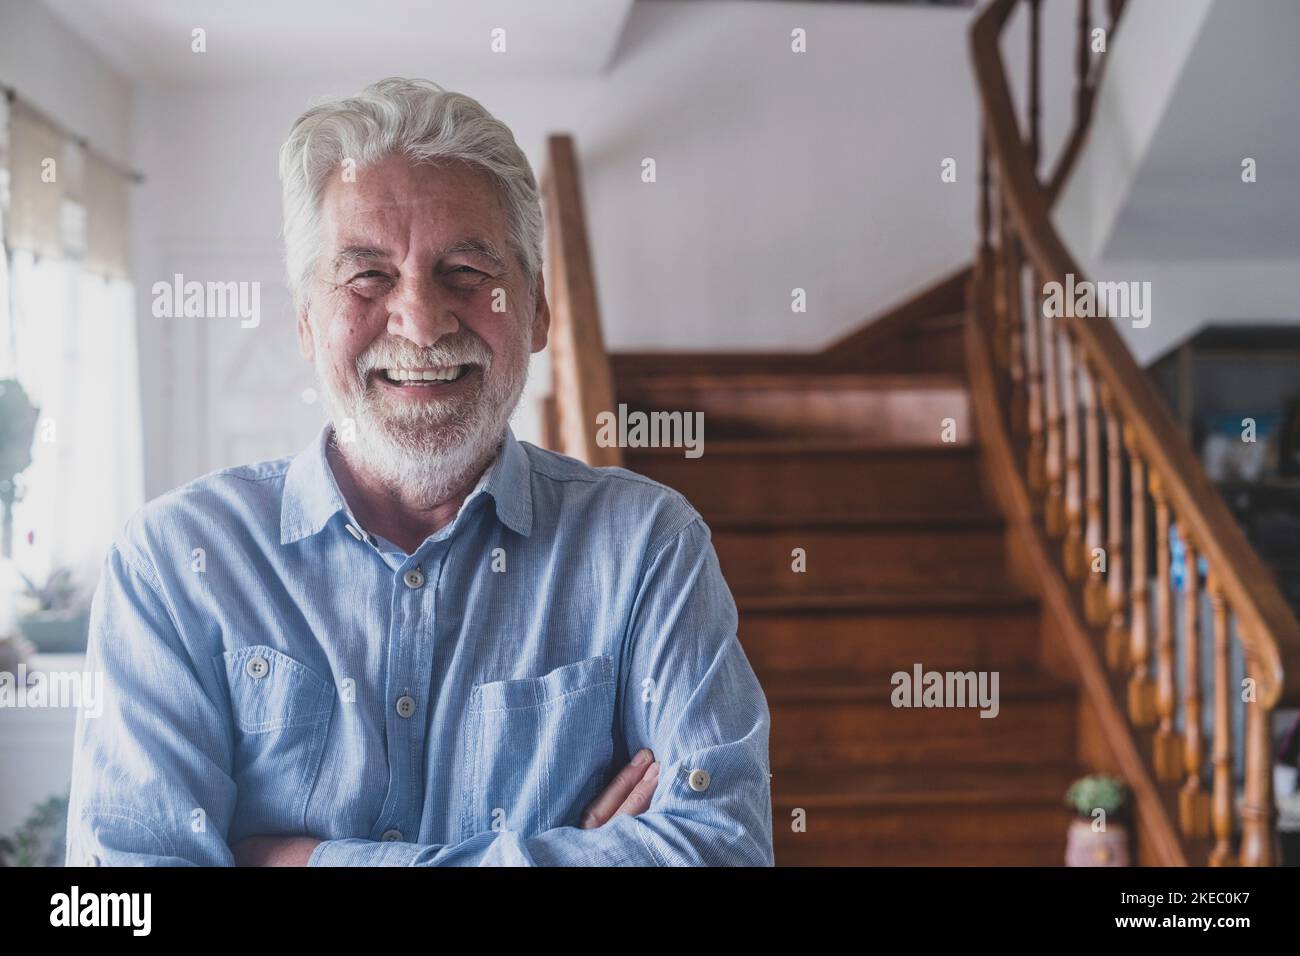 Happy old man with grey hair, senior 80s smiling with white teeth at home. Portrait of one cheerful grandfather relaxing indoor. Stock Photo